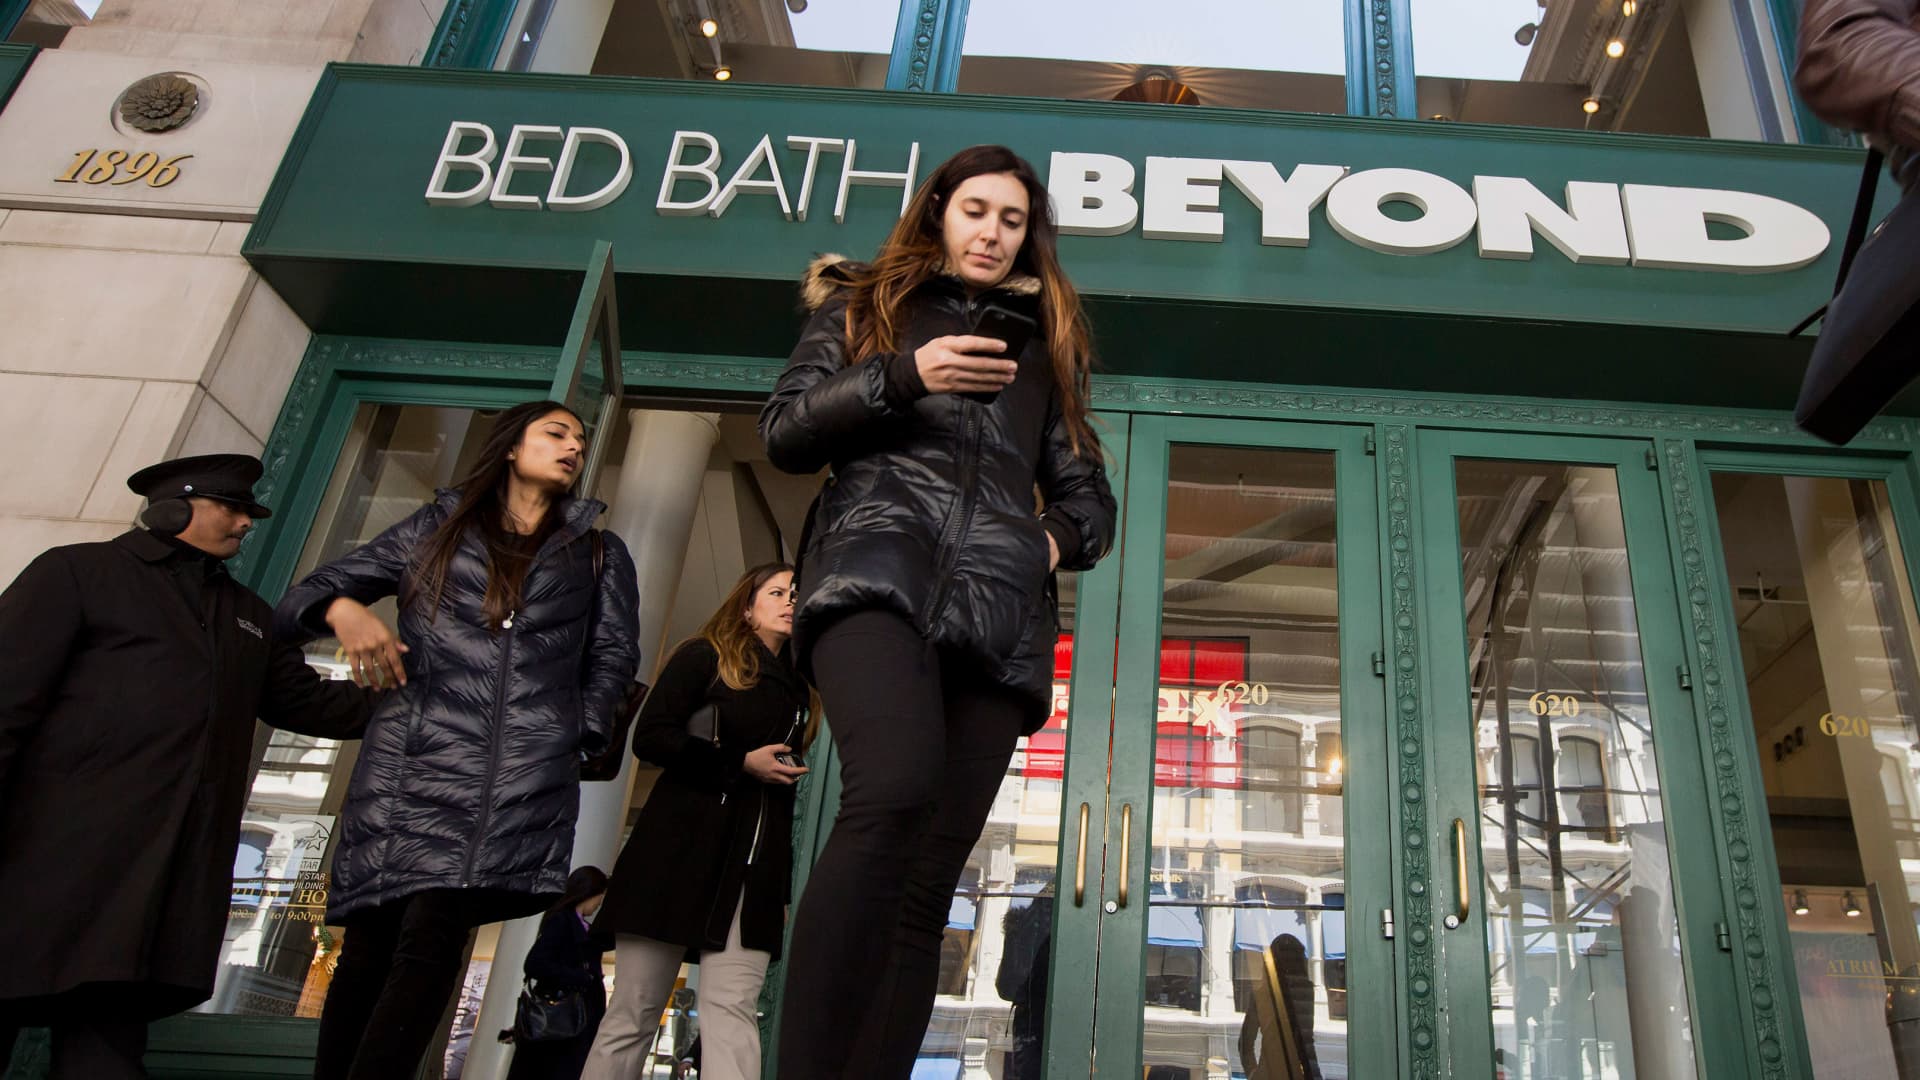 Ryan Cohen brings an activist approach to Bed Bath & Beyond. Here’s what may be next for the retailer